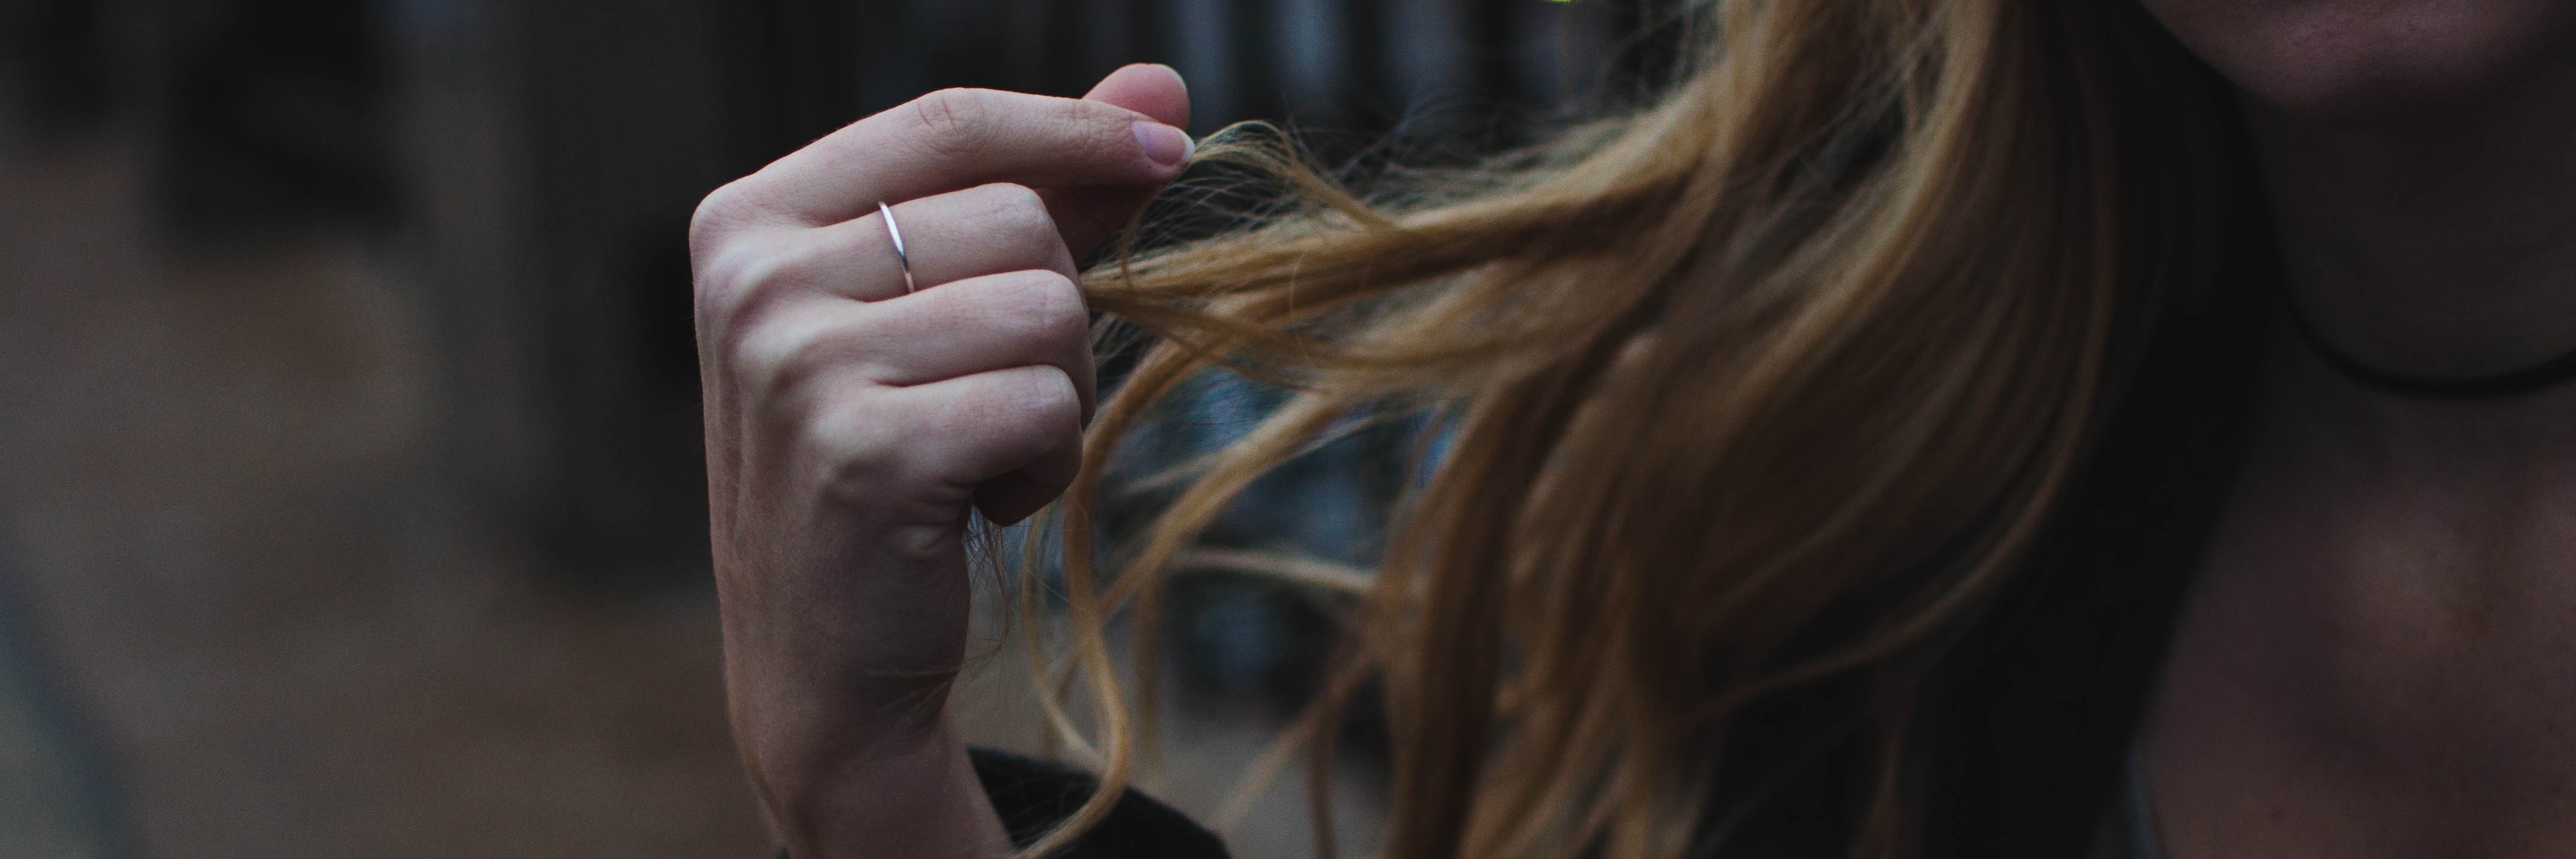 blonde woman playing with hair in anxious manner